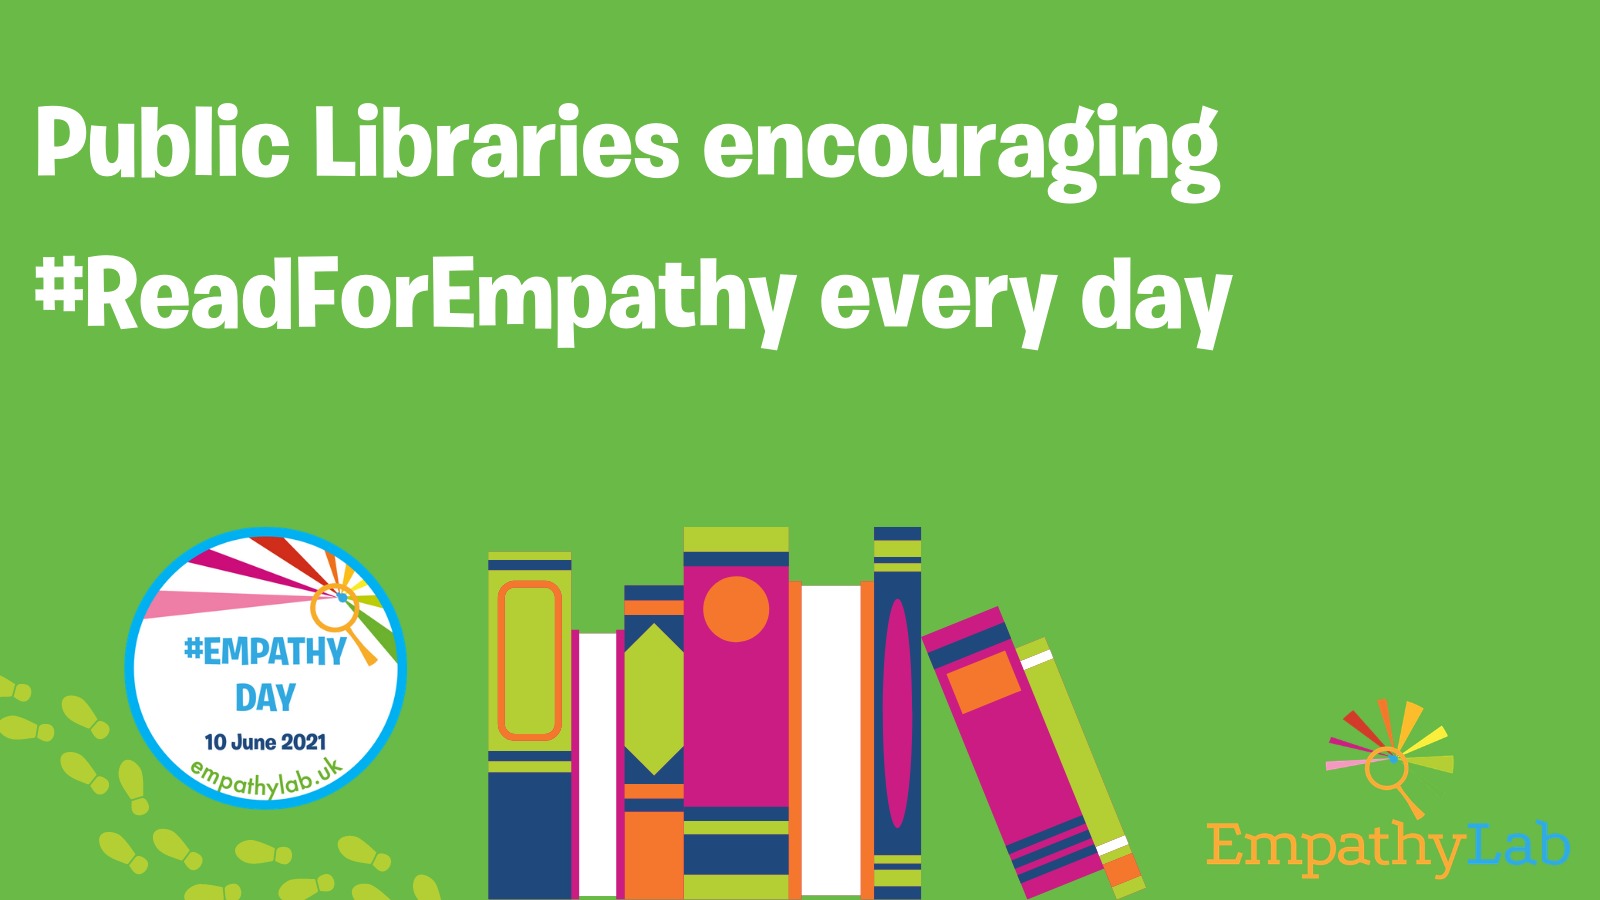 Aura Libraries are joining in for Empathy Day.